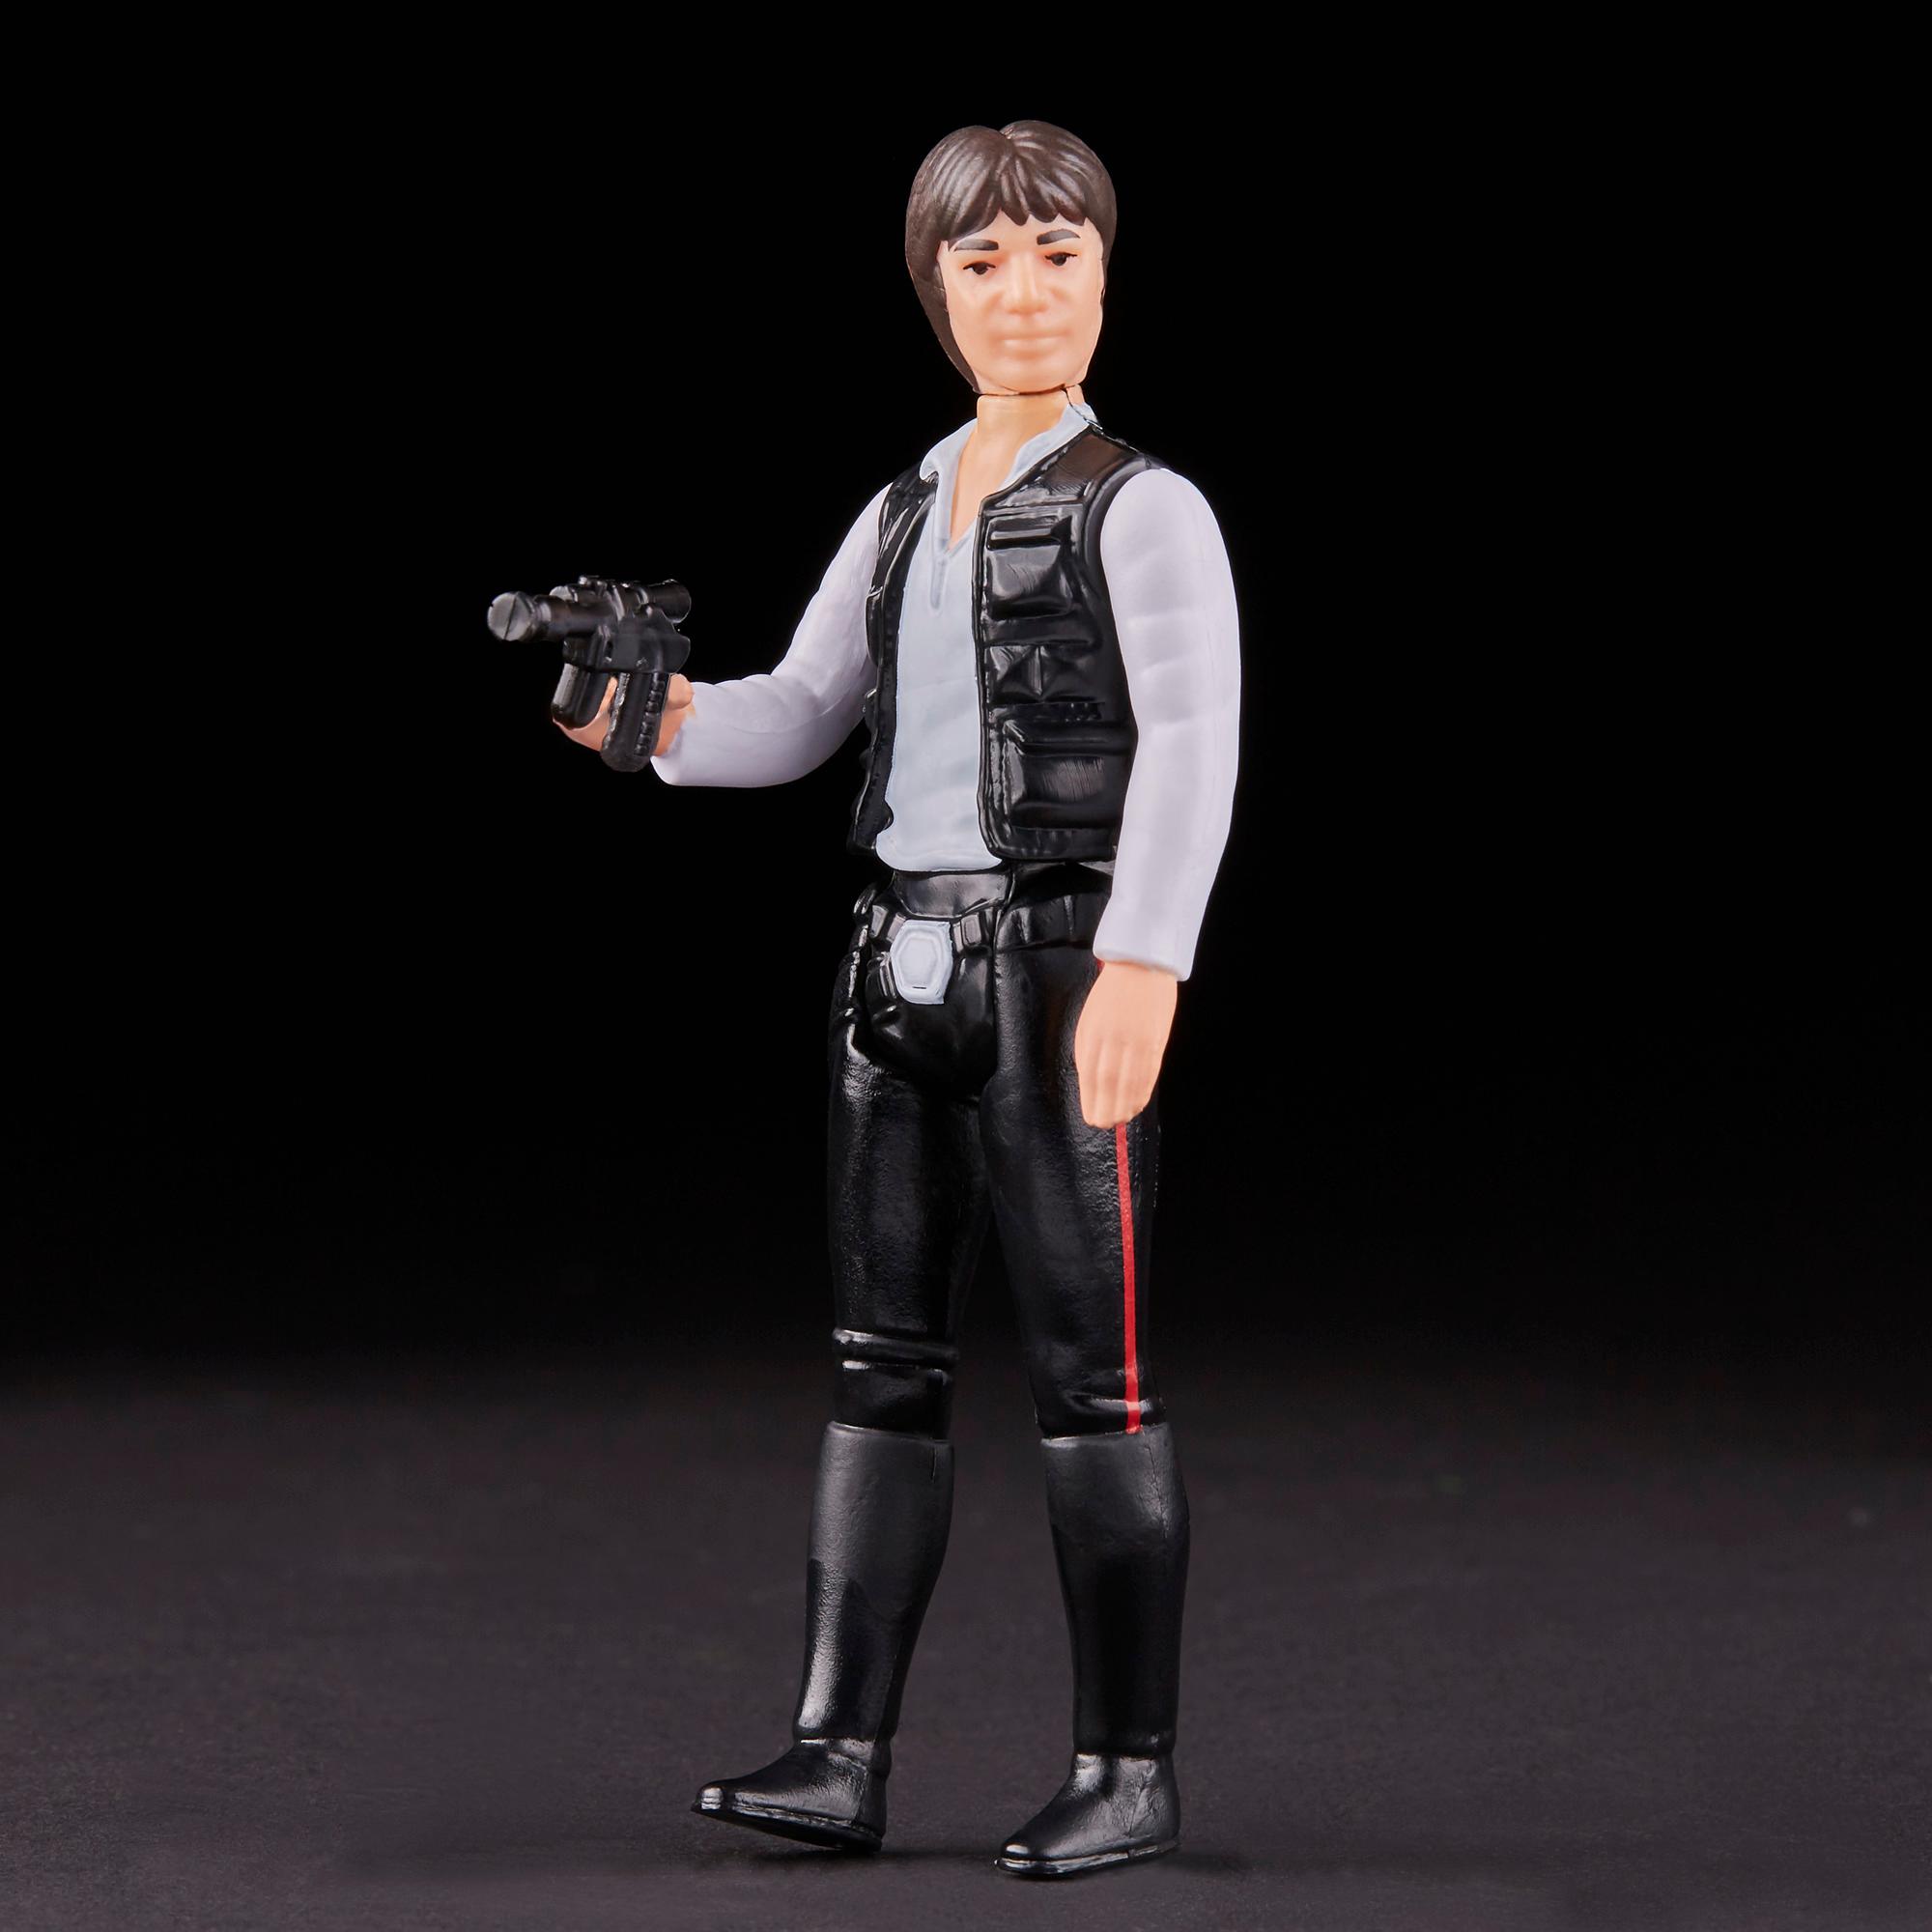 A New Hope Han Solo 3.75-Inch-Scale Action Figure for sale online Hasbro Star Wars Retro Collection Episode IV